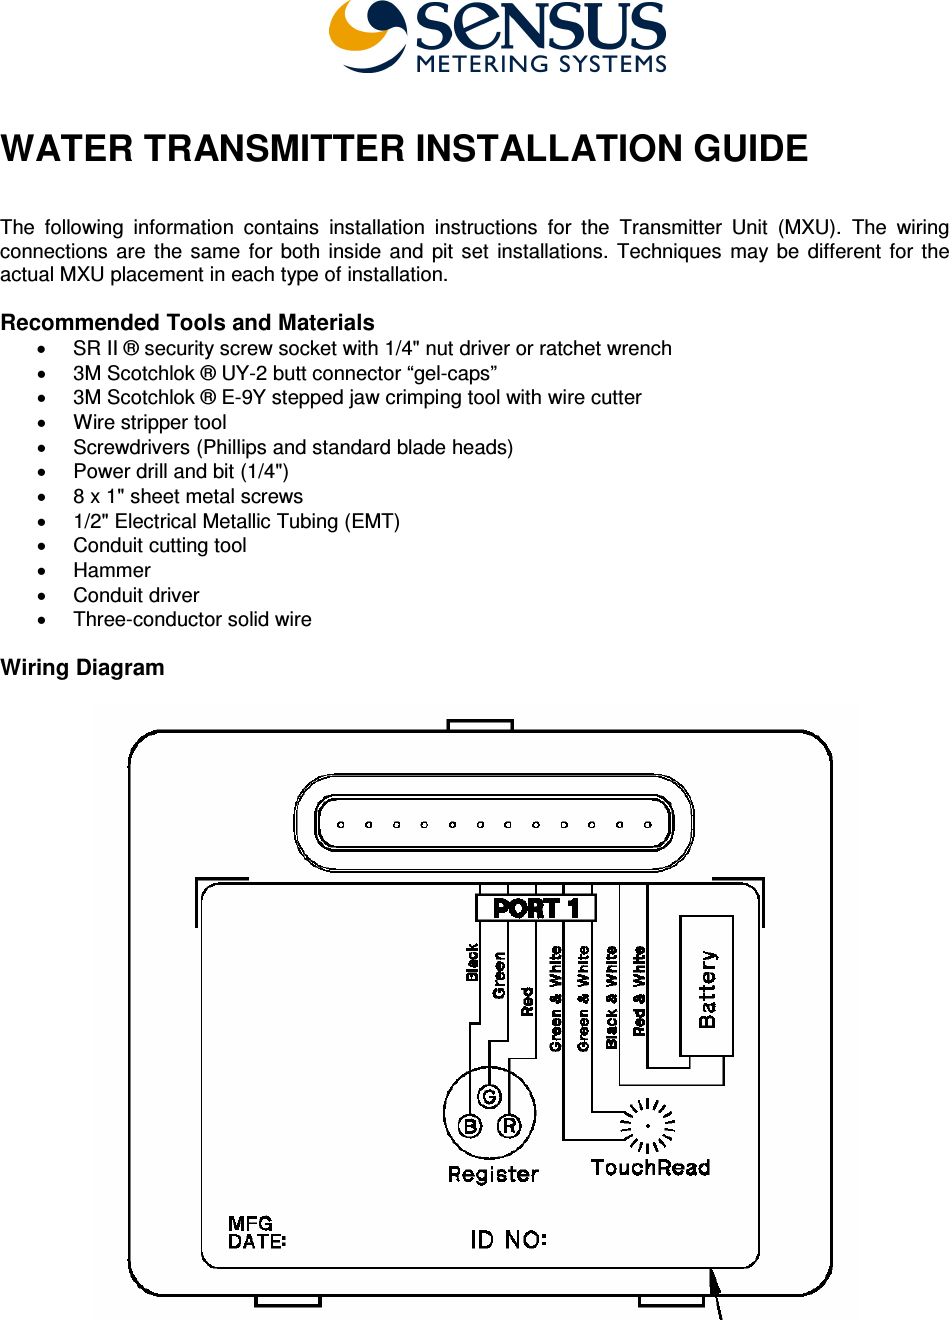  WATER TRANSMITTER INSTALLATION GUIDE   The  following  information  contains  installation  instructions  for  the  Transmitter  Unit  (MXU).  The  wiring connections  are  the  same  for  both  inside  and  pit  set  installations.  Techniques  may  be  different  for  the actual MXU placement in each type of installation.  Recommended Tools and Materials •  SR II ® security screw socket with 1/4&quot; nut driver or ratchet wrench •  3M Scotchlok ® UY-2 butt connector “gel-caps” •  3M Scotchlok ® E-9Y stepped jaw crimping tool with wire cutter •  Wire stripper tool •  Screwdrivers (Phillips and standard blade heads) •  Power drill and bit (1/4&quot;) •  8 x 1&quot; sheet metal screws •  1/2&quot; Electrical Metallic Tubing (EMT) •  Conduit cutting tool •  Hammer •  Conduit driver  •  Three-conductor solid wire   Wiring Diagram       